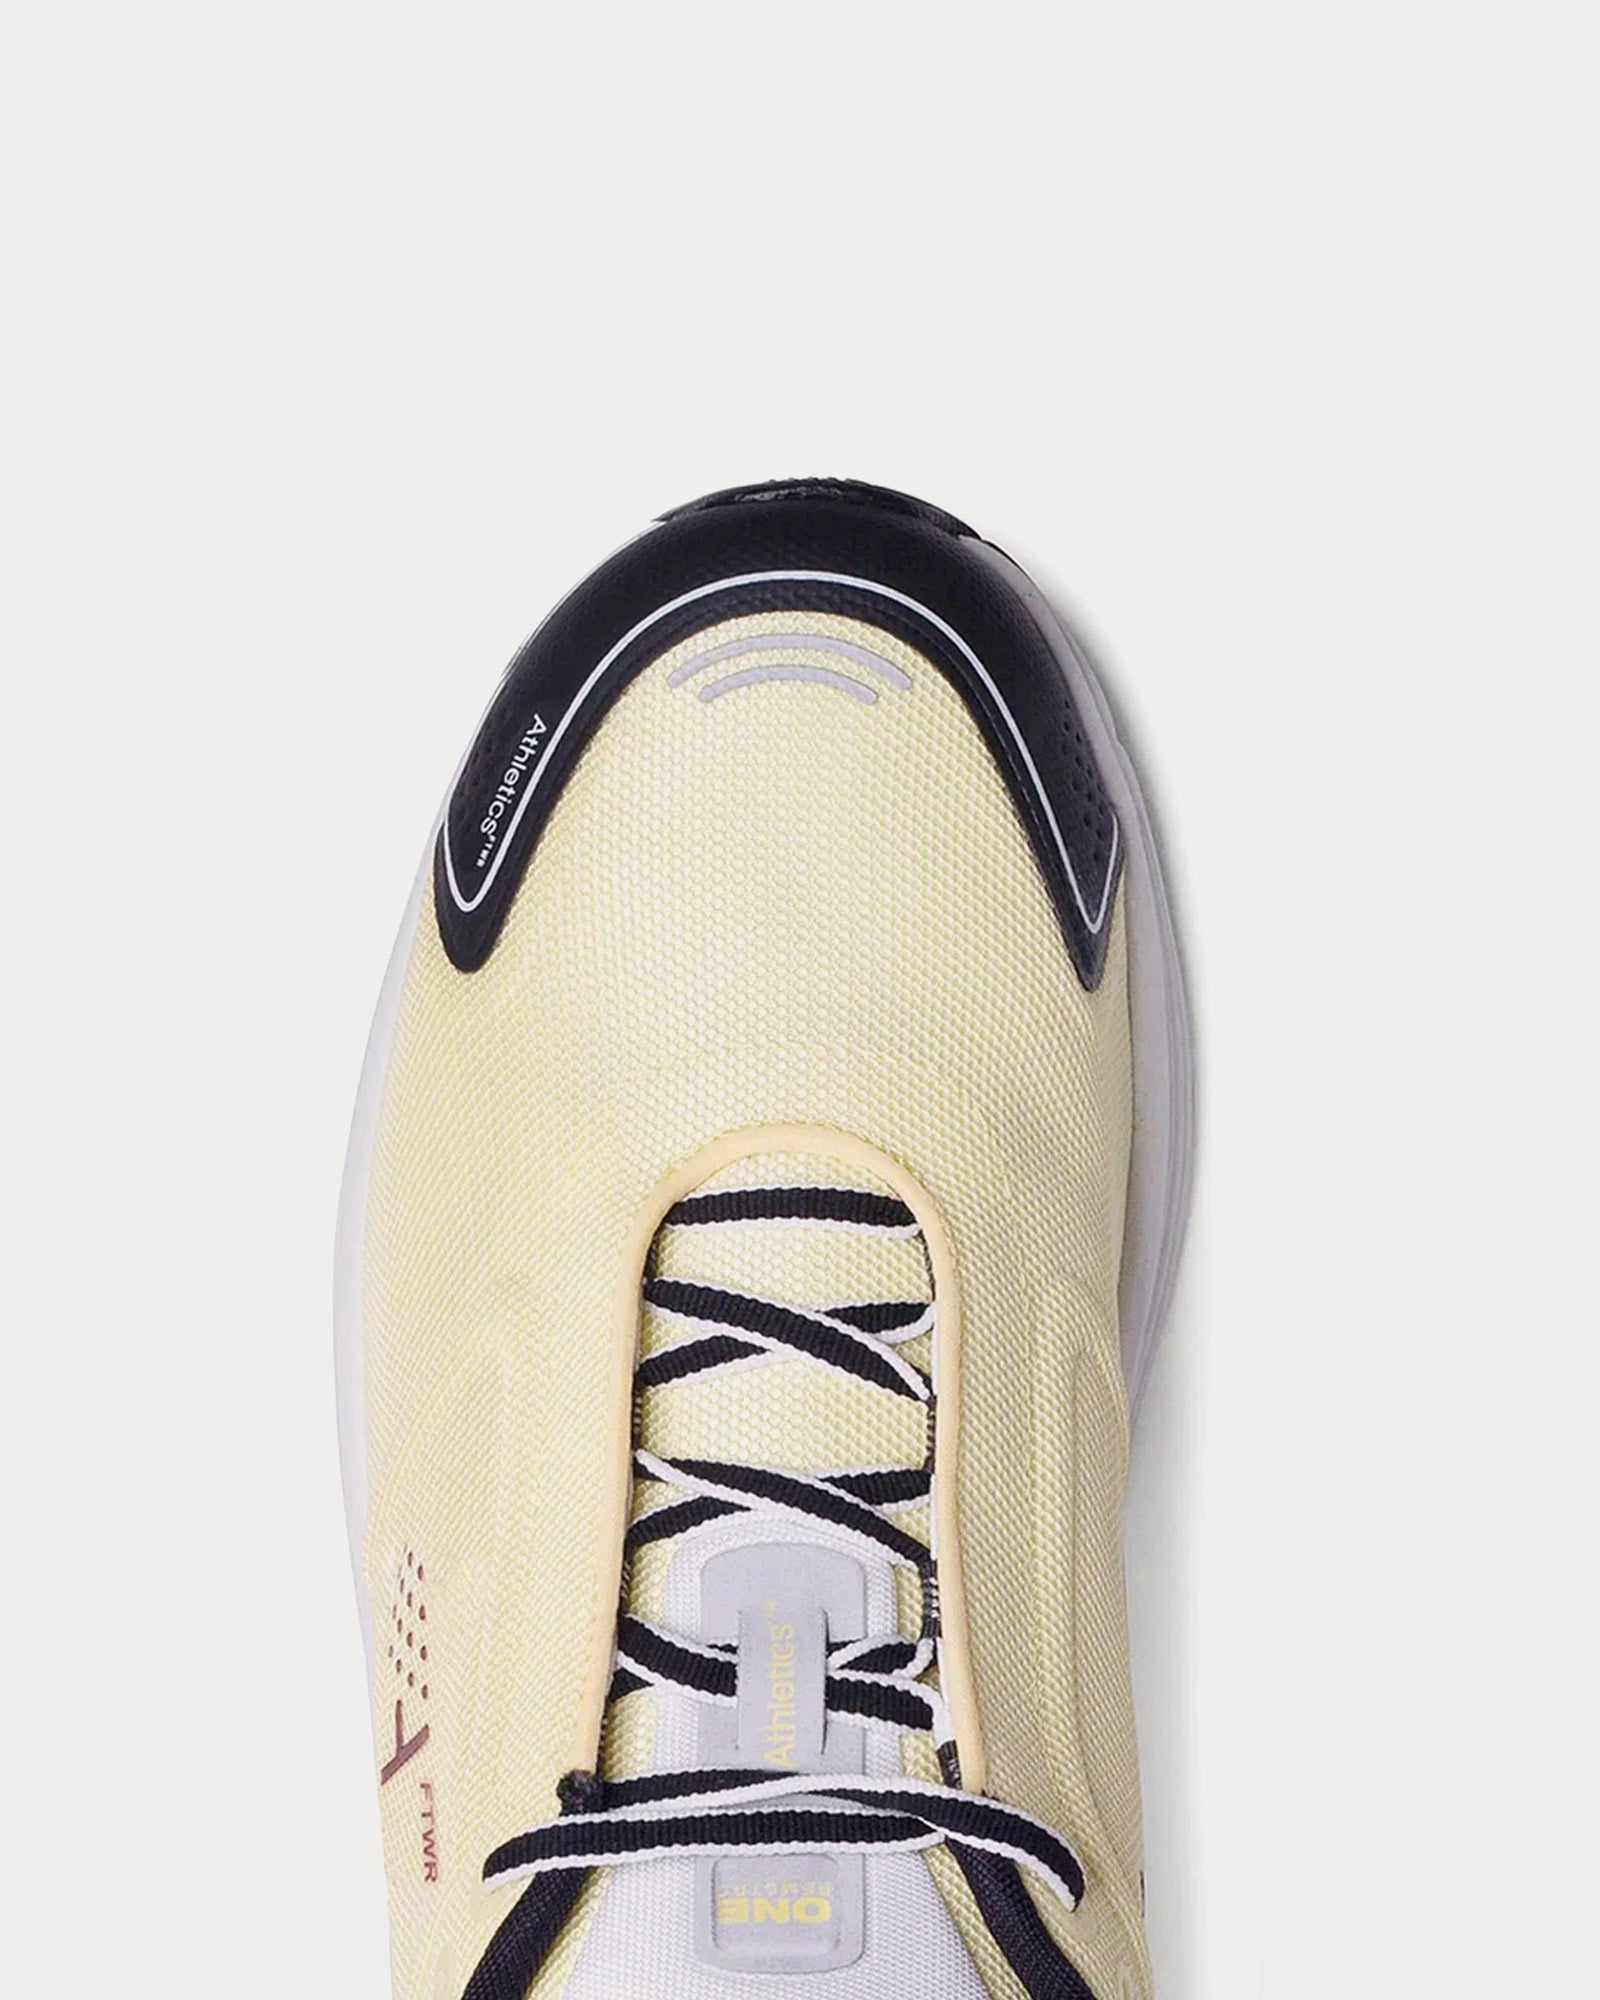 Athletics FTWR - One Remastered Wax Yellow Low Top Sneakers